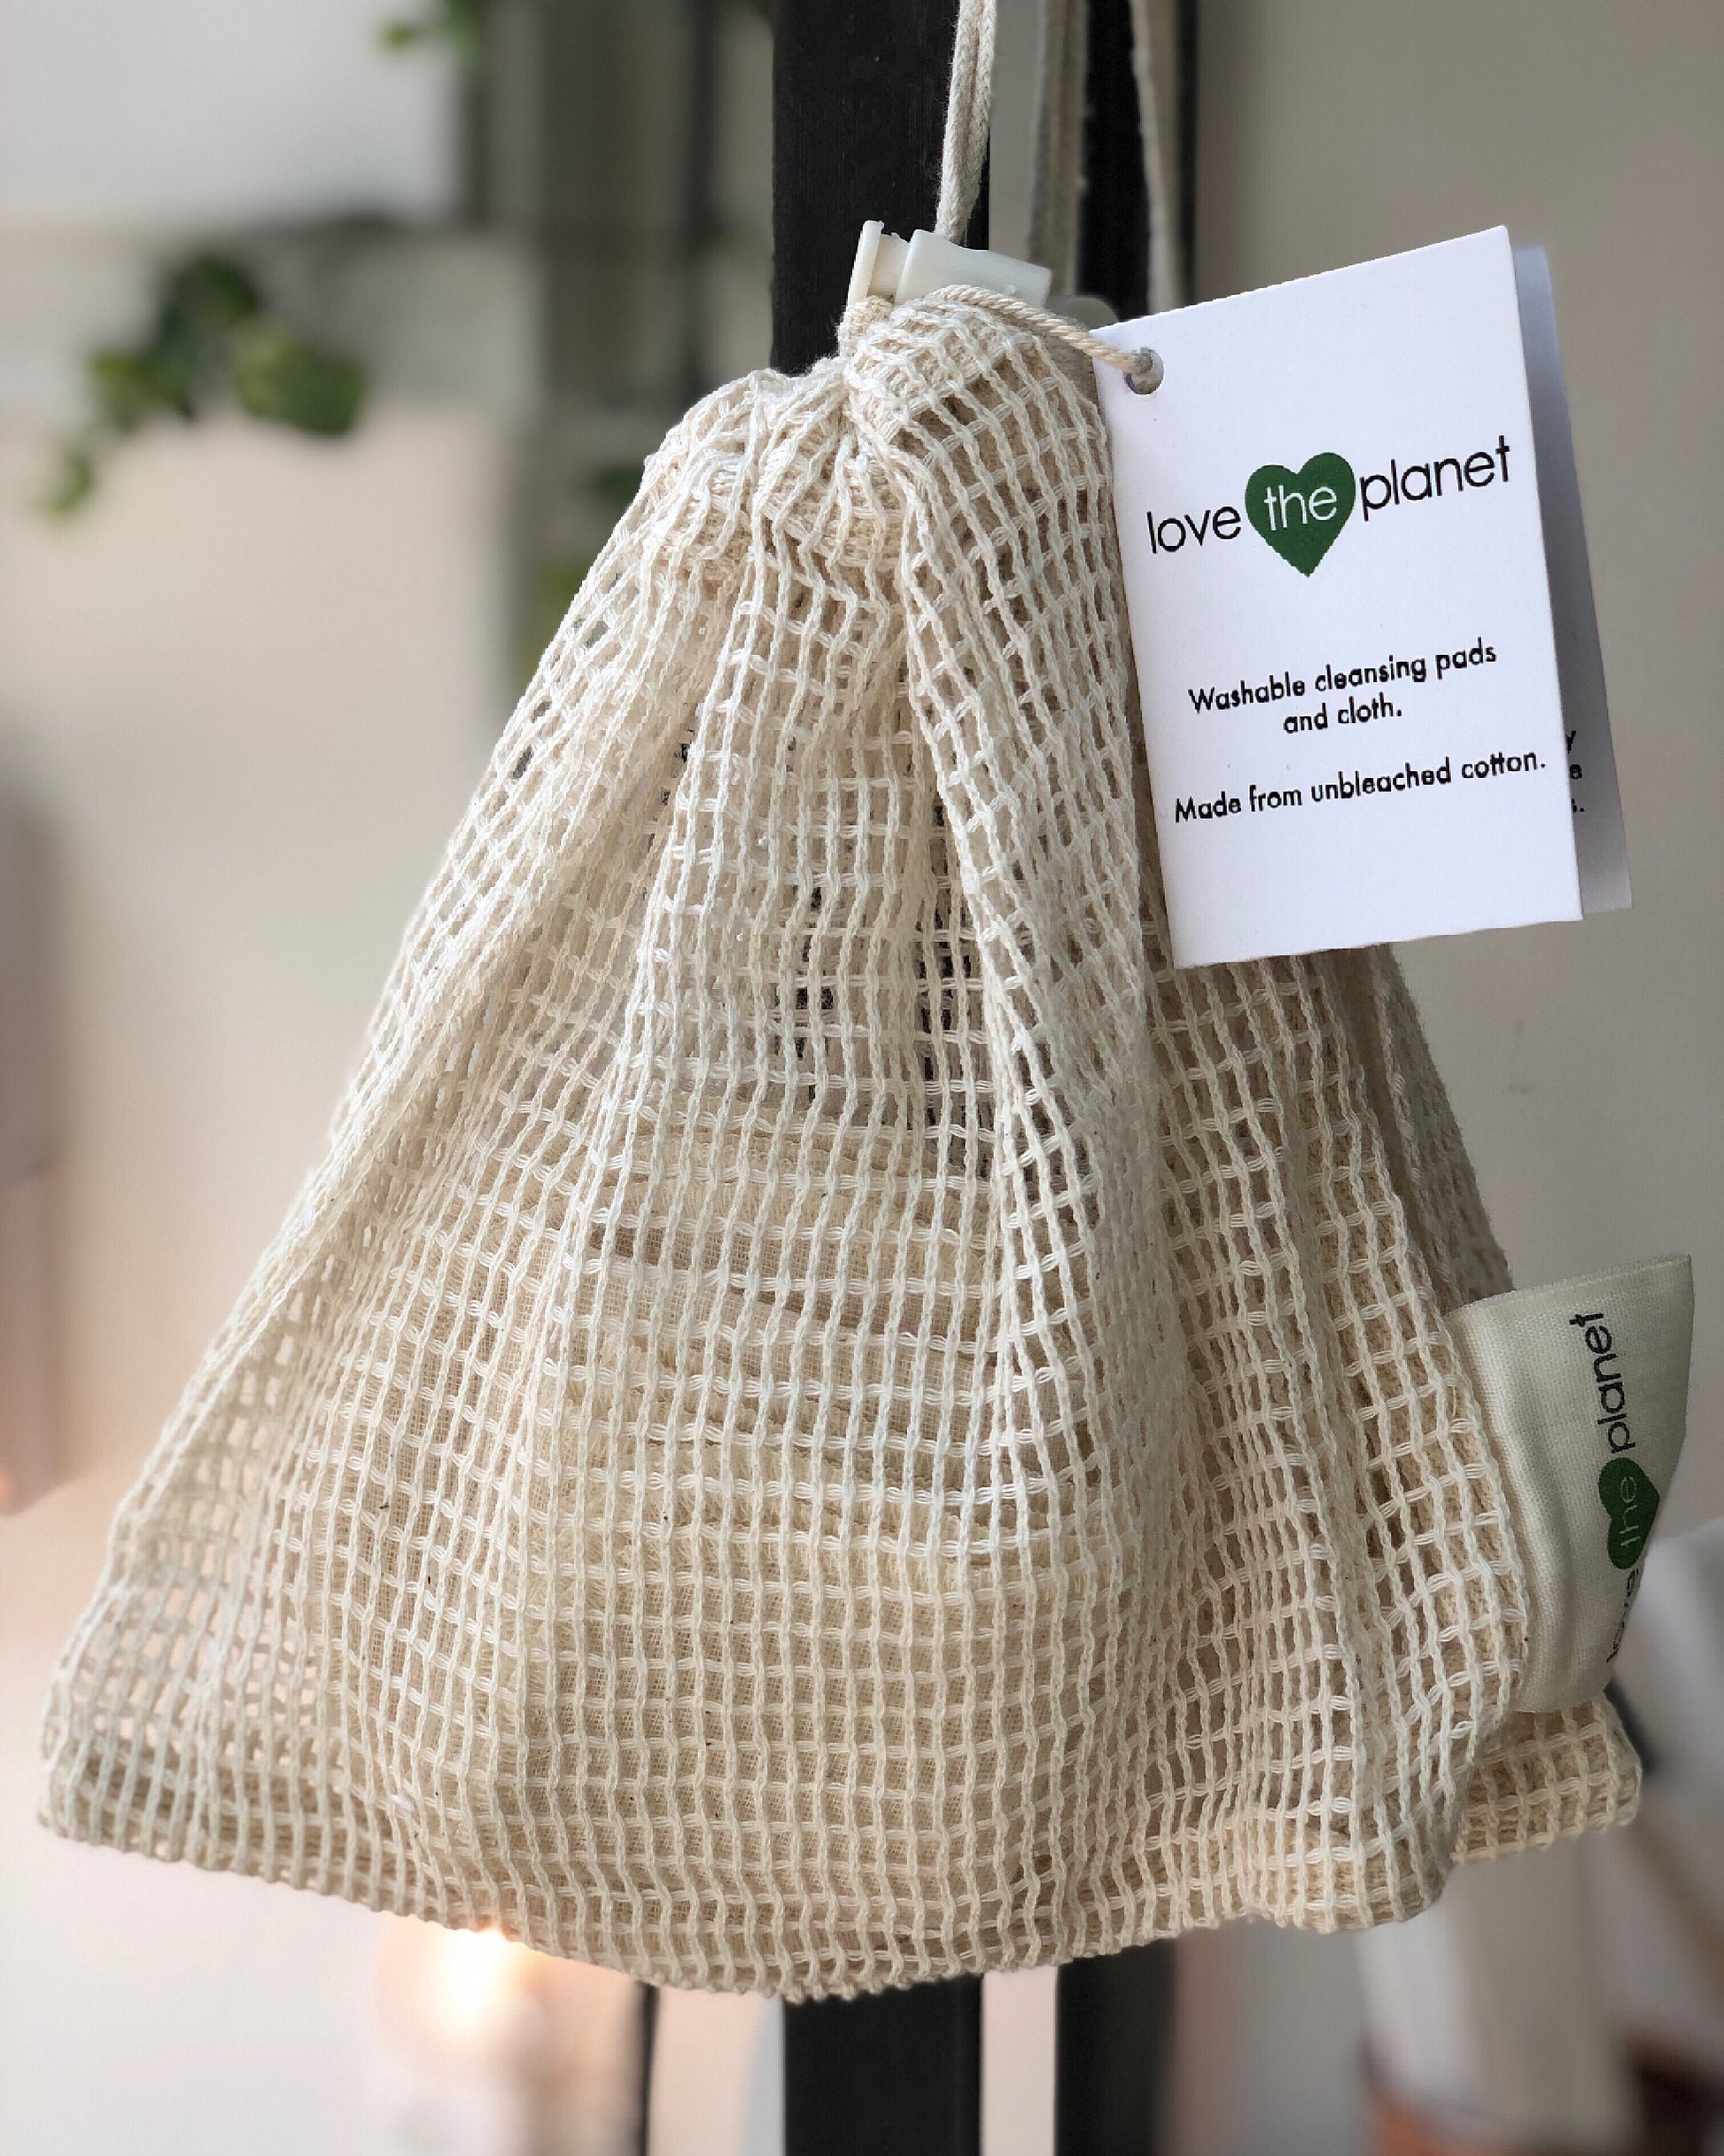 love the planet - cotton muslin rounds & cloth set - in a net bag